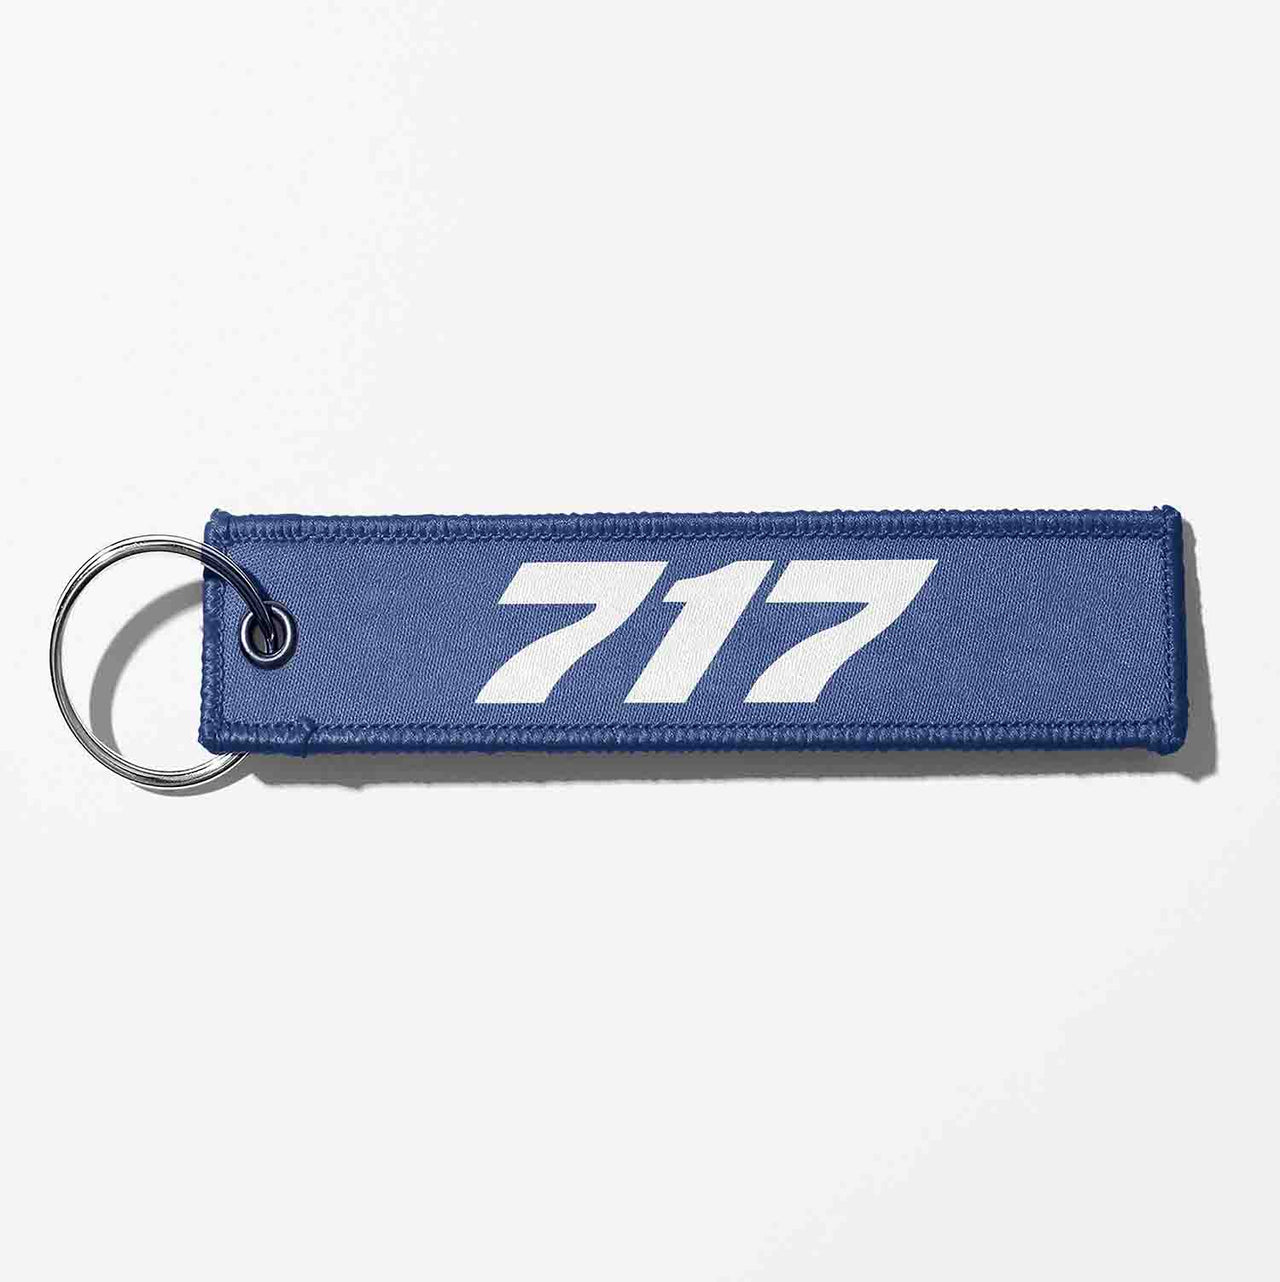 Boeing 717 Flat Text Designed Key Chains